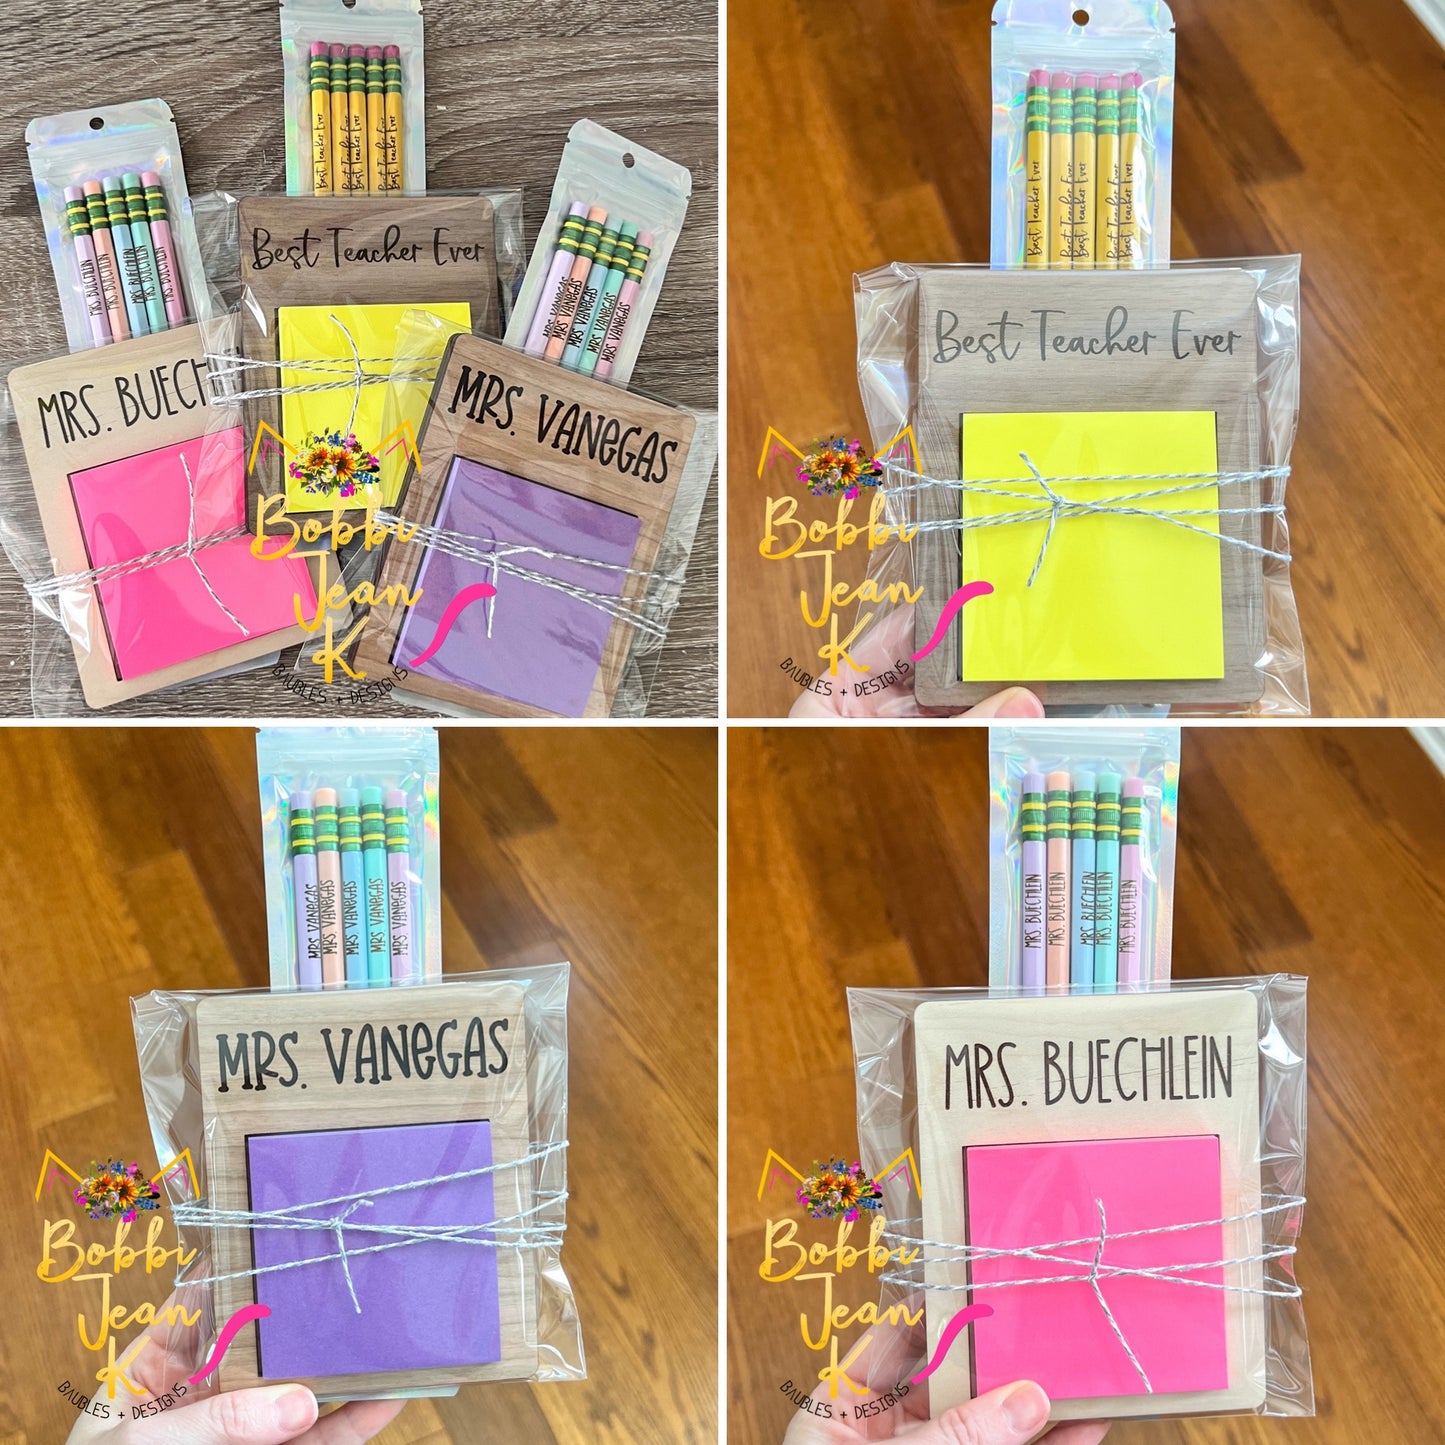 Custom Personalized Pencil & Sticky Note/Note Pad Holder Combo - PLEASE COMPLETE PERSONALIZATION BOXES (BOXES WILL APPEAR UNDER TITLE)